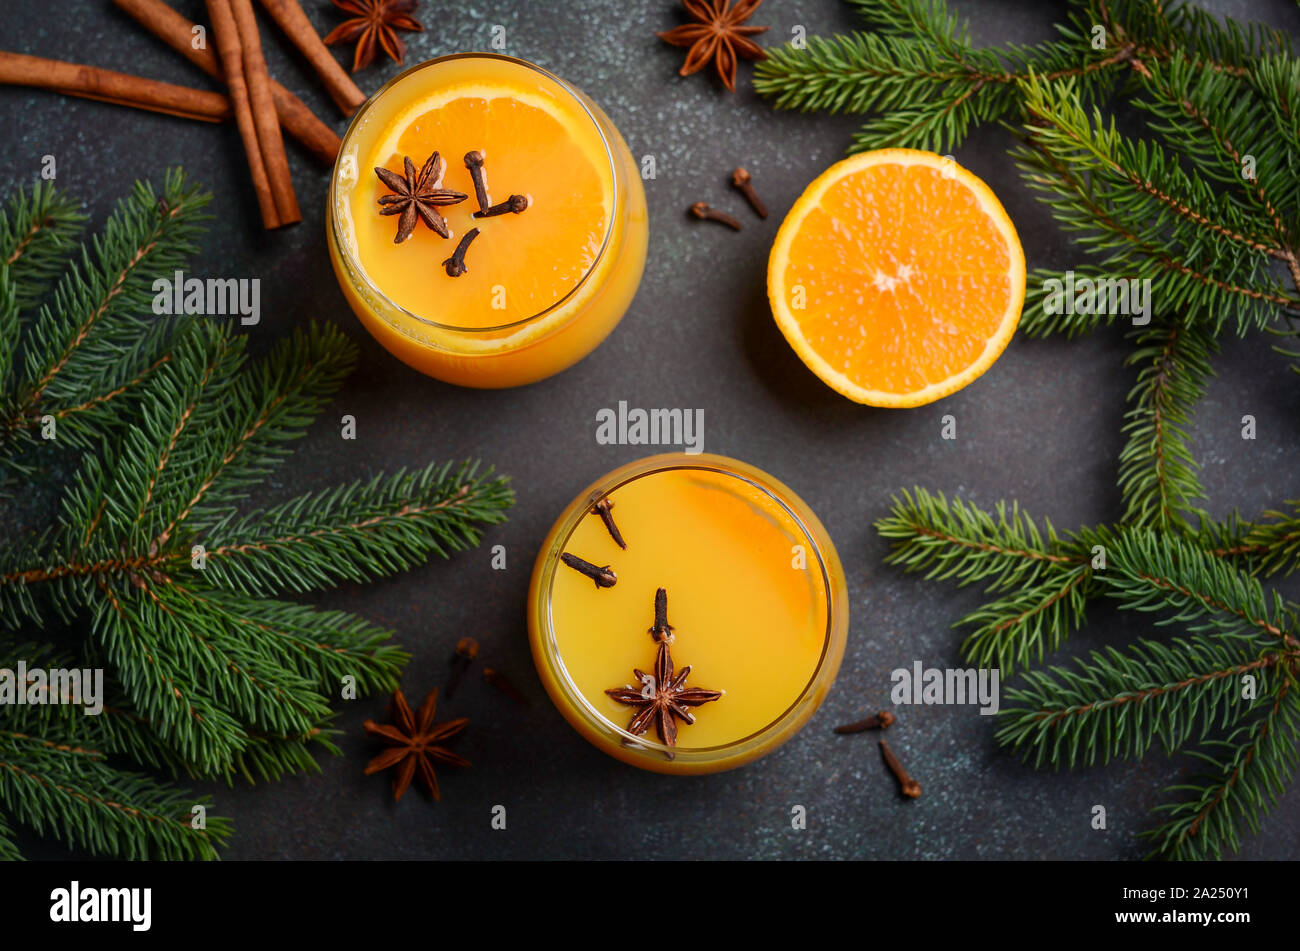 Fall Winter Cocktail Hot Spicy Orange Punch with Spices. Holiday Concept Decorated with Fir Branches and Spices. Stock Photo